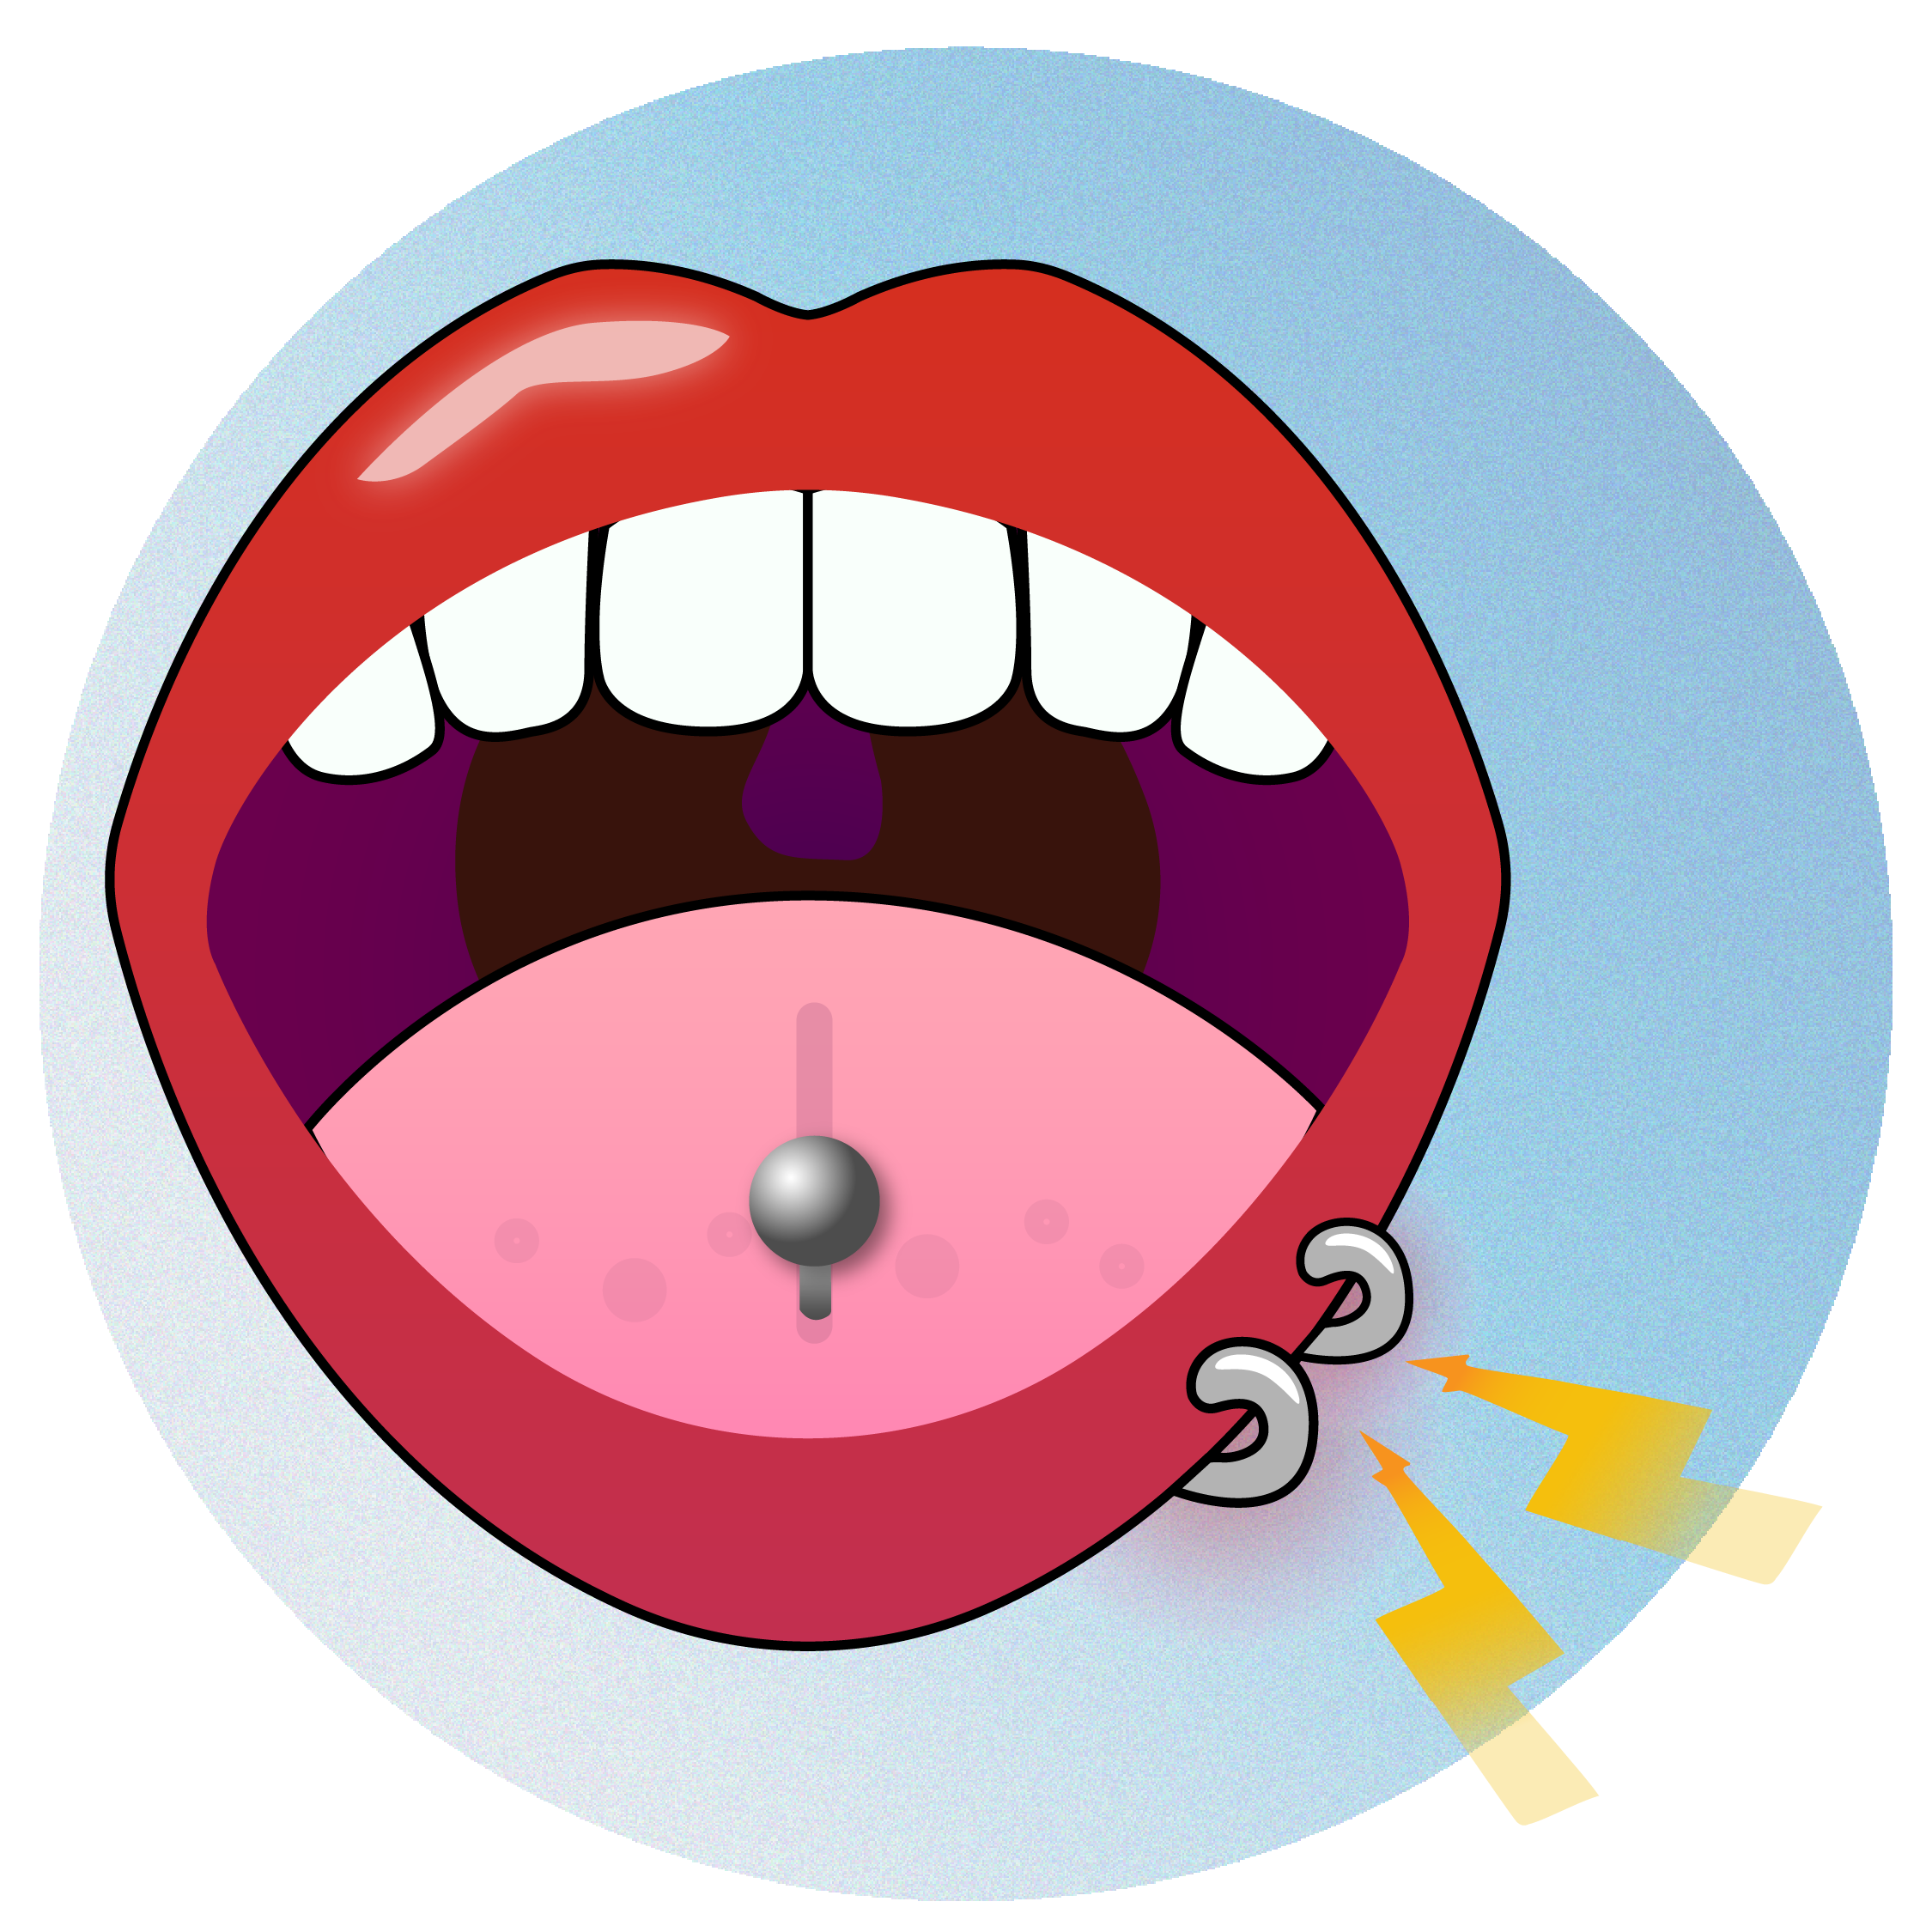 Illustration of an open mouth with a piercing in the tongue and two ring piercings on the lower lip